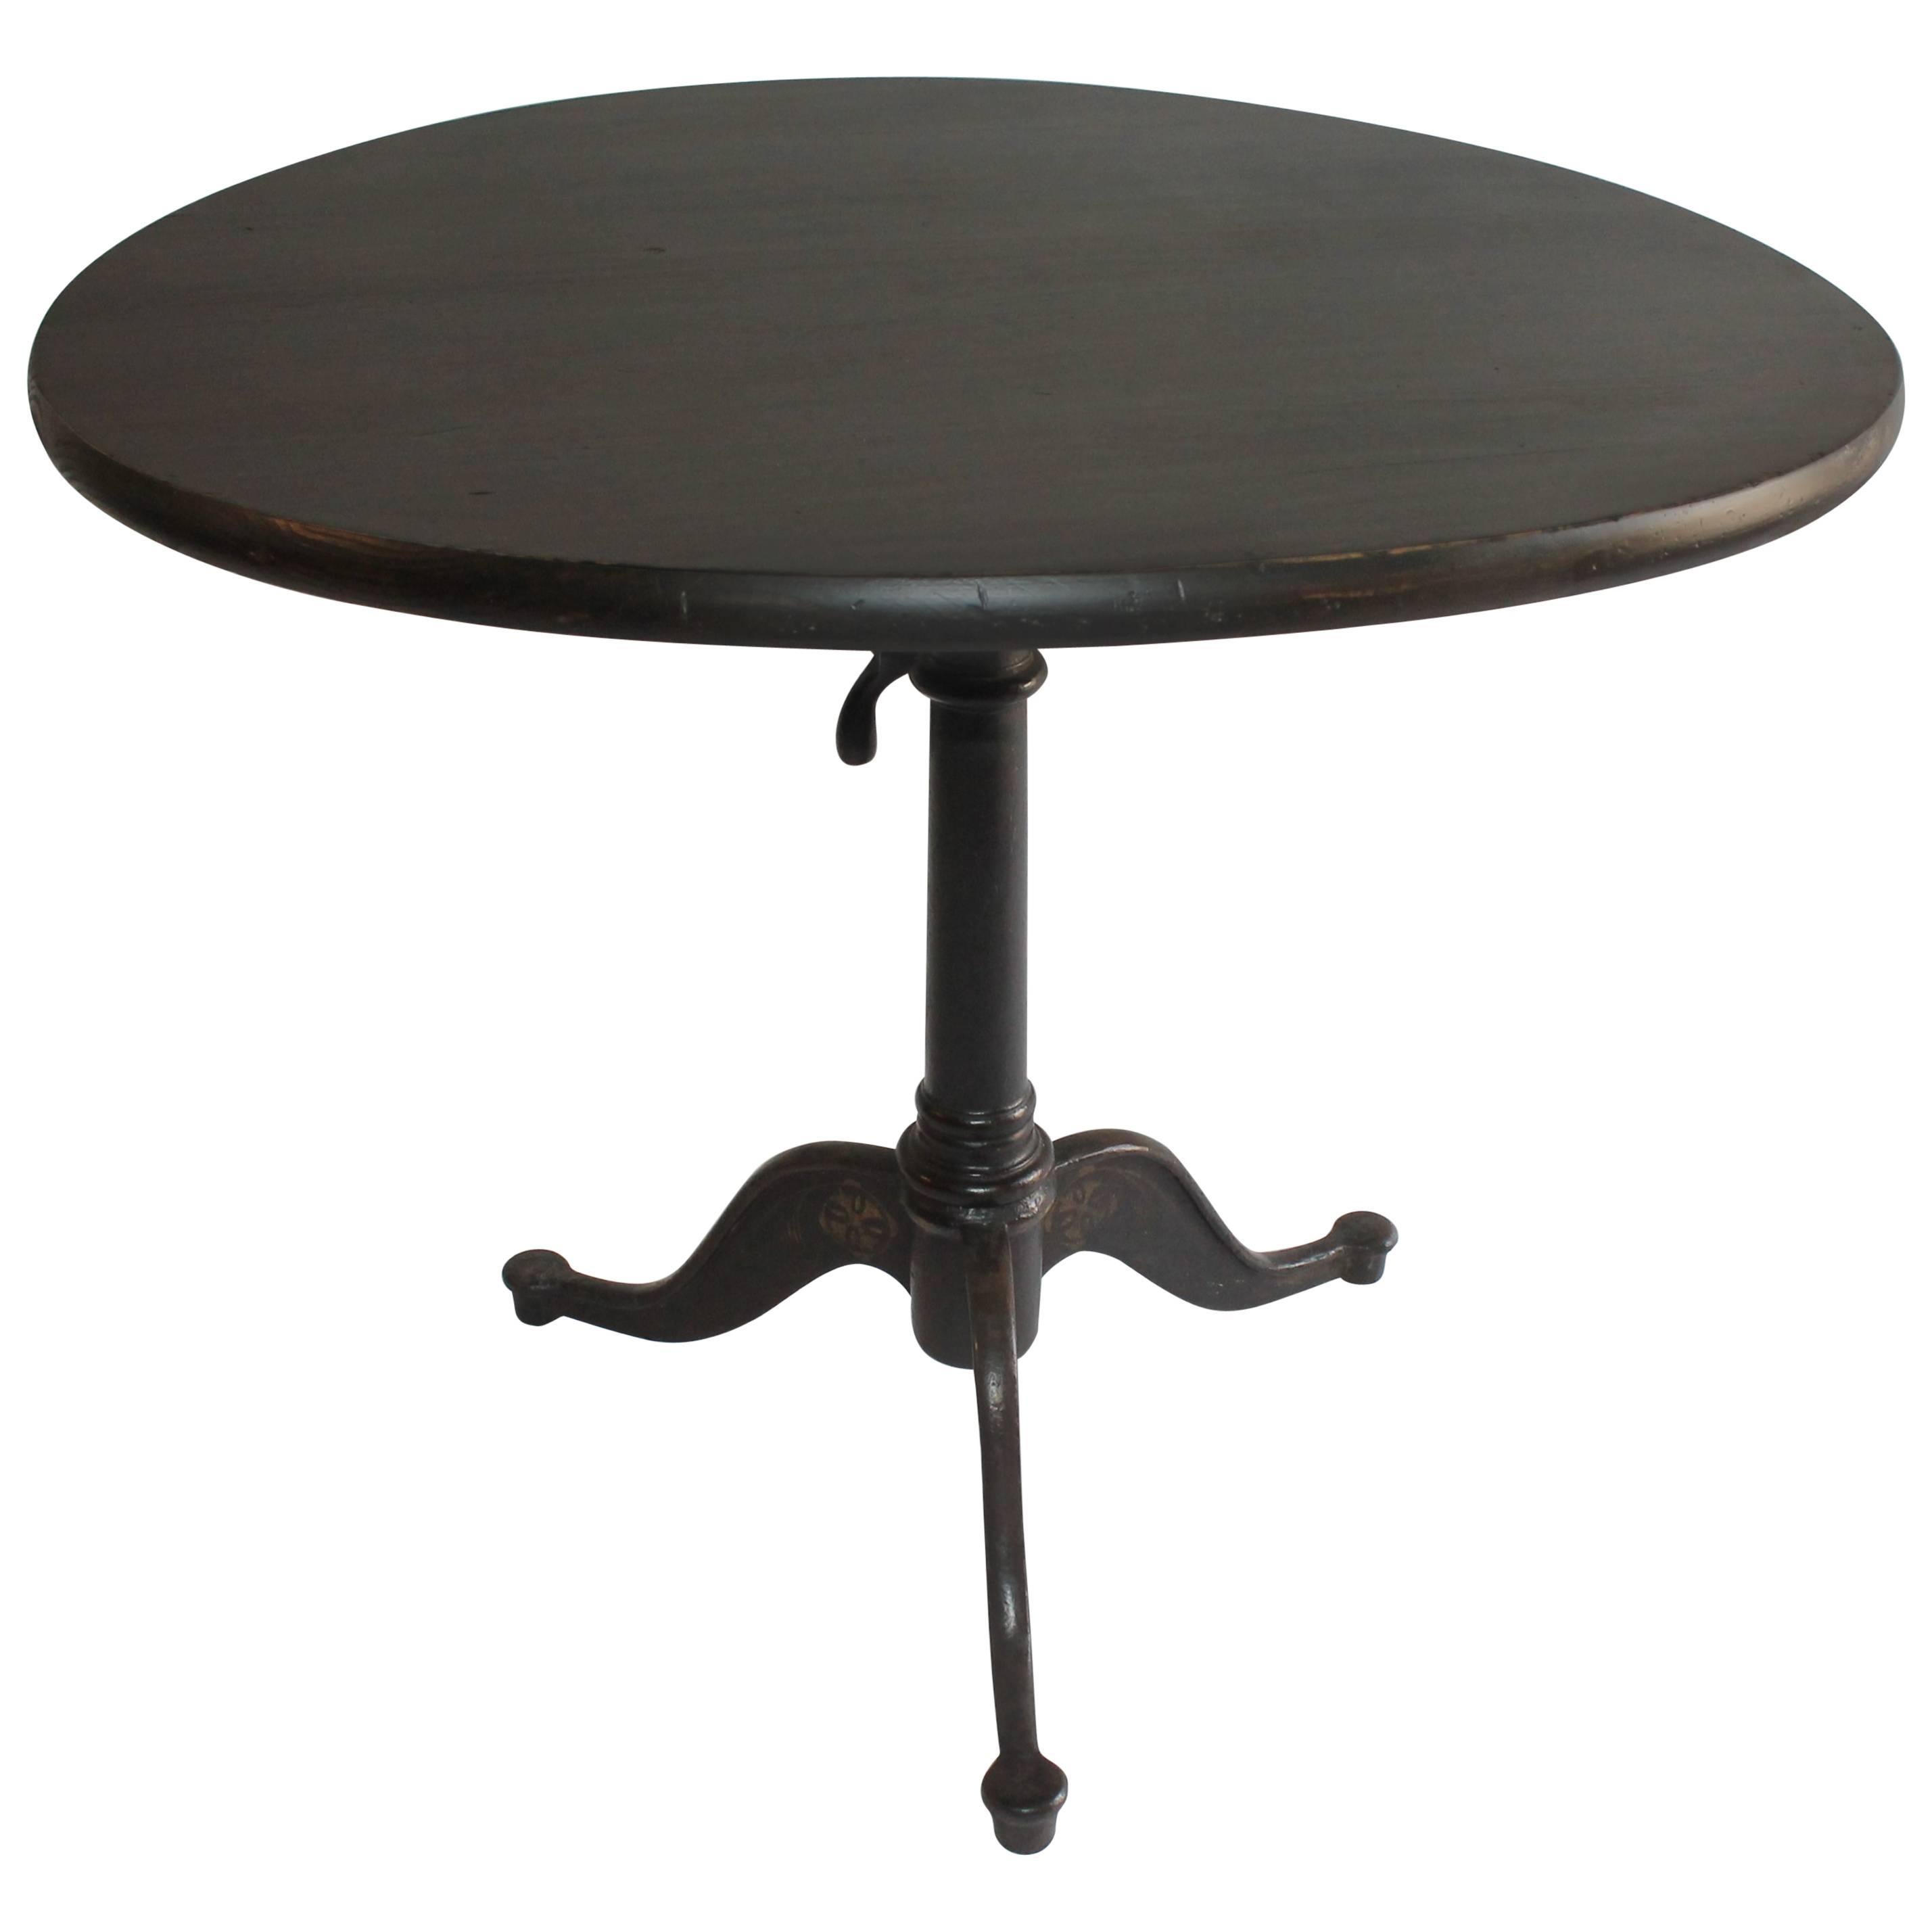 19th Century Industrial Pedestal Table with Iron Base